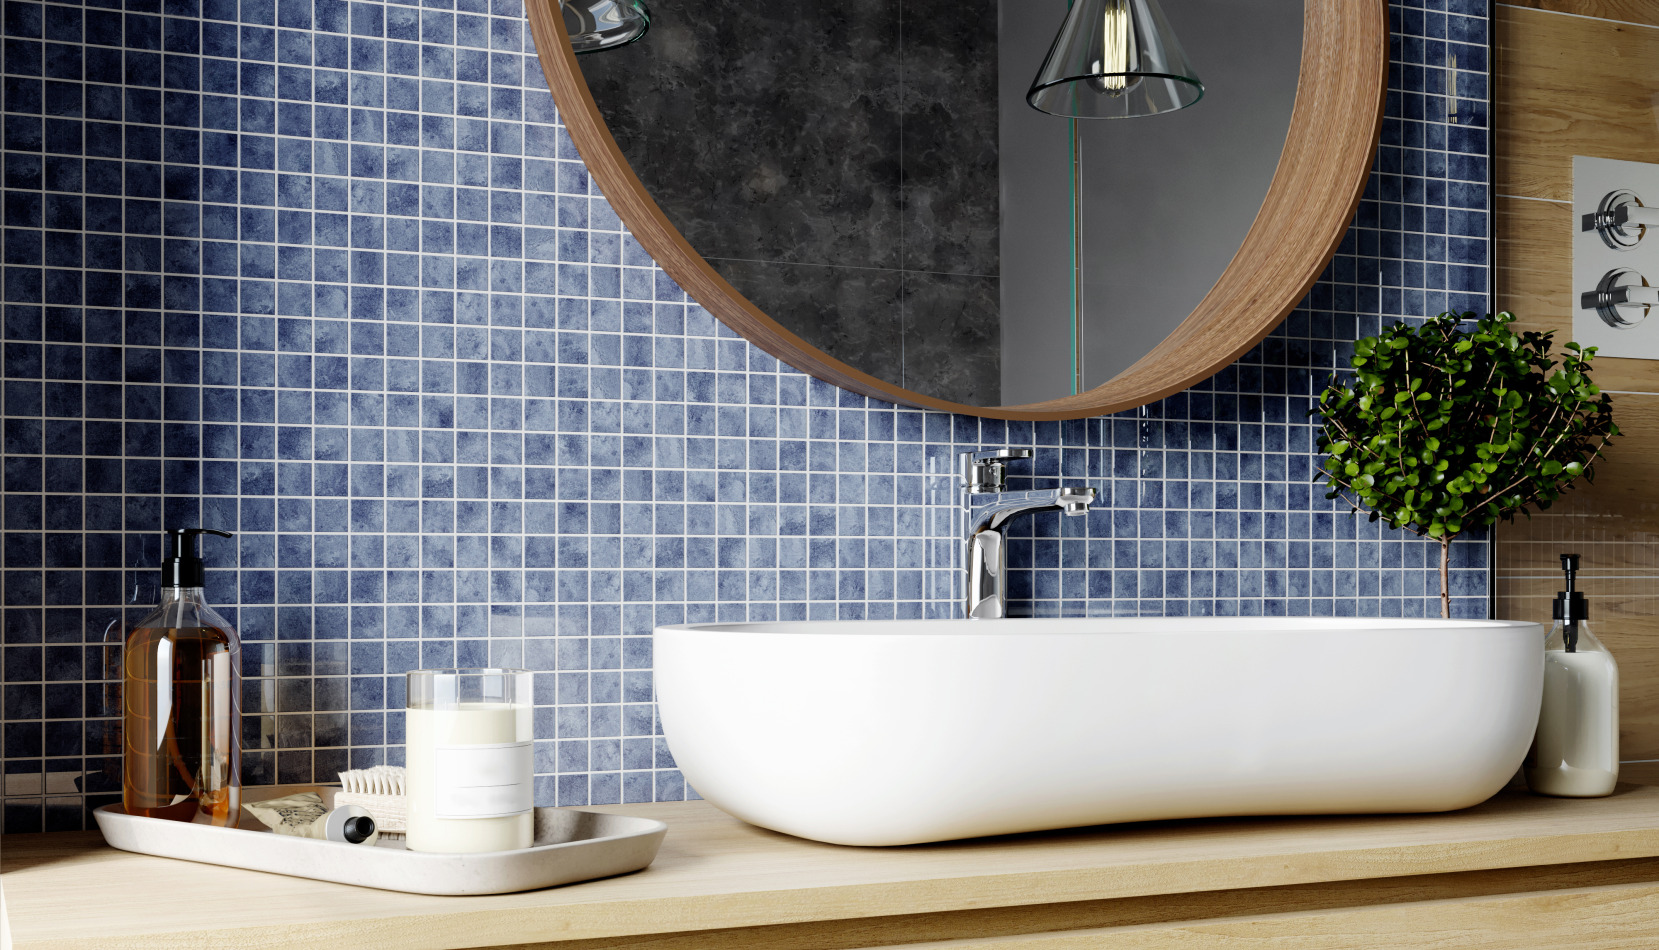 Interior of a modern bathroom with blue tiled walls